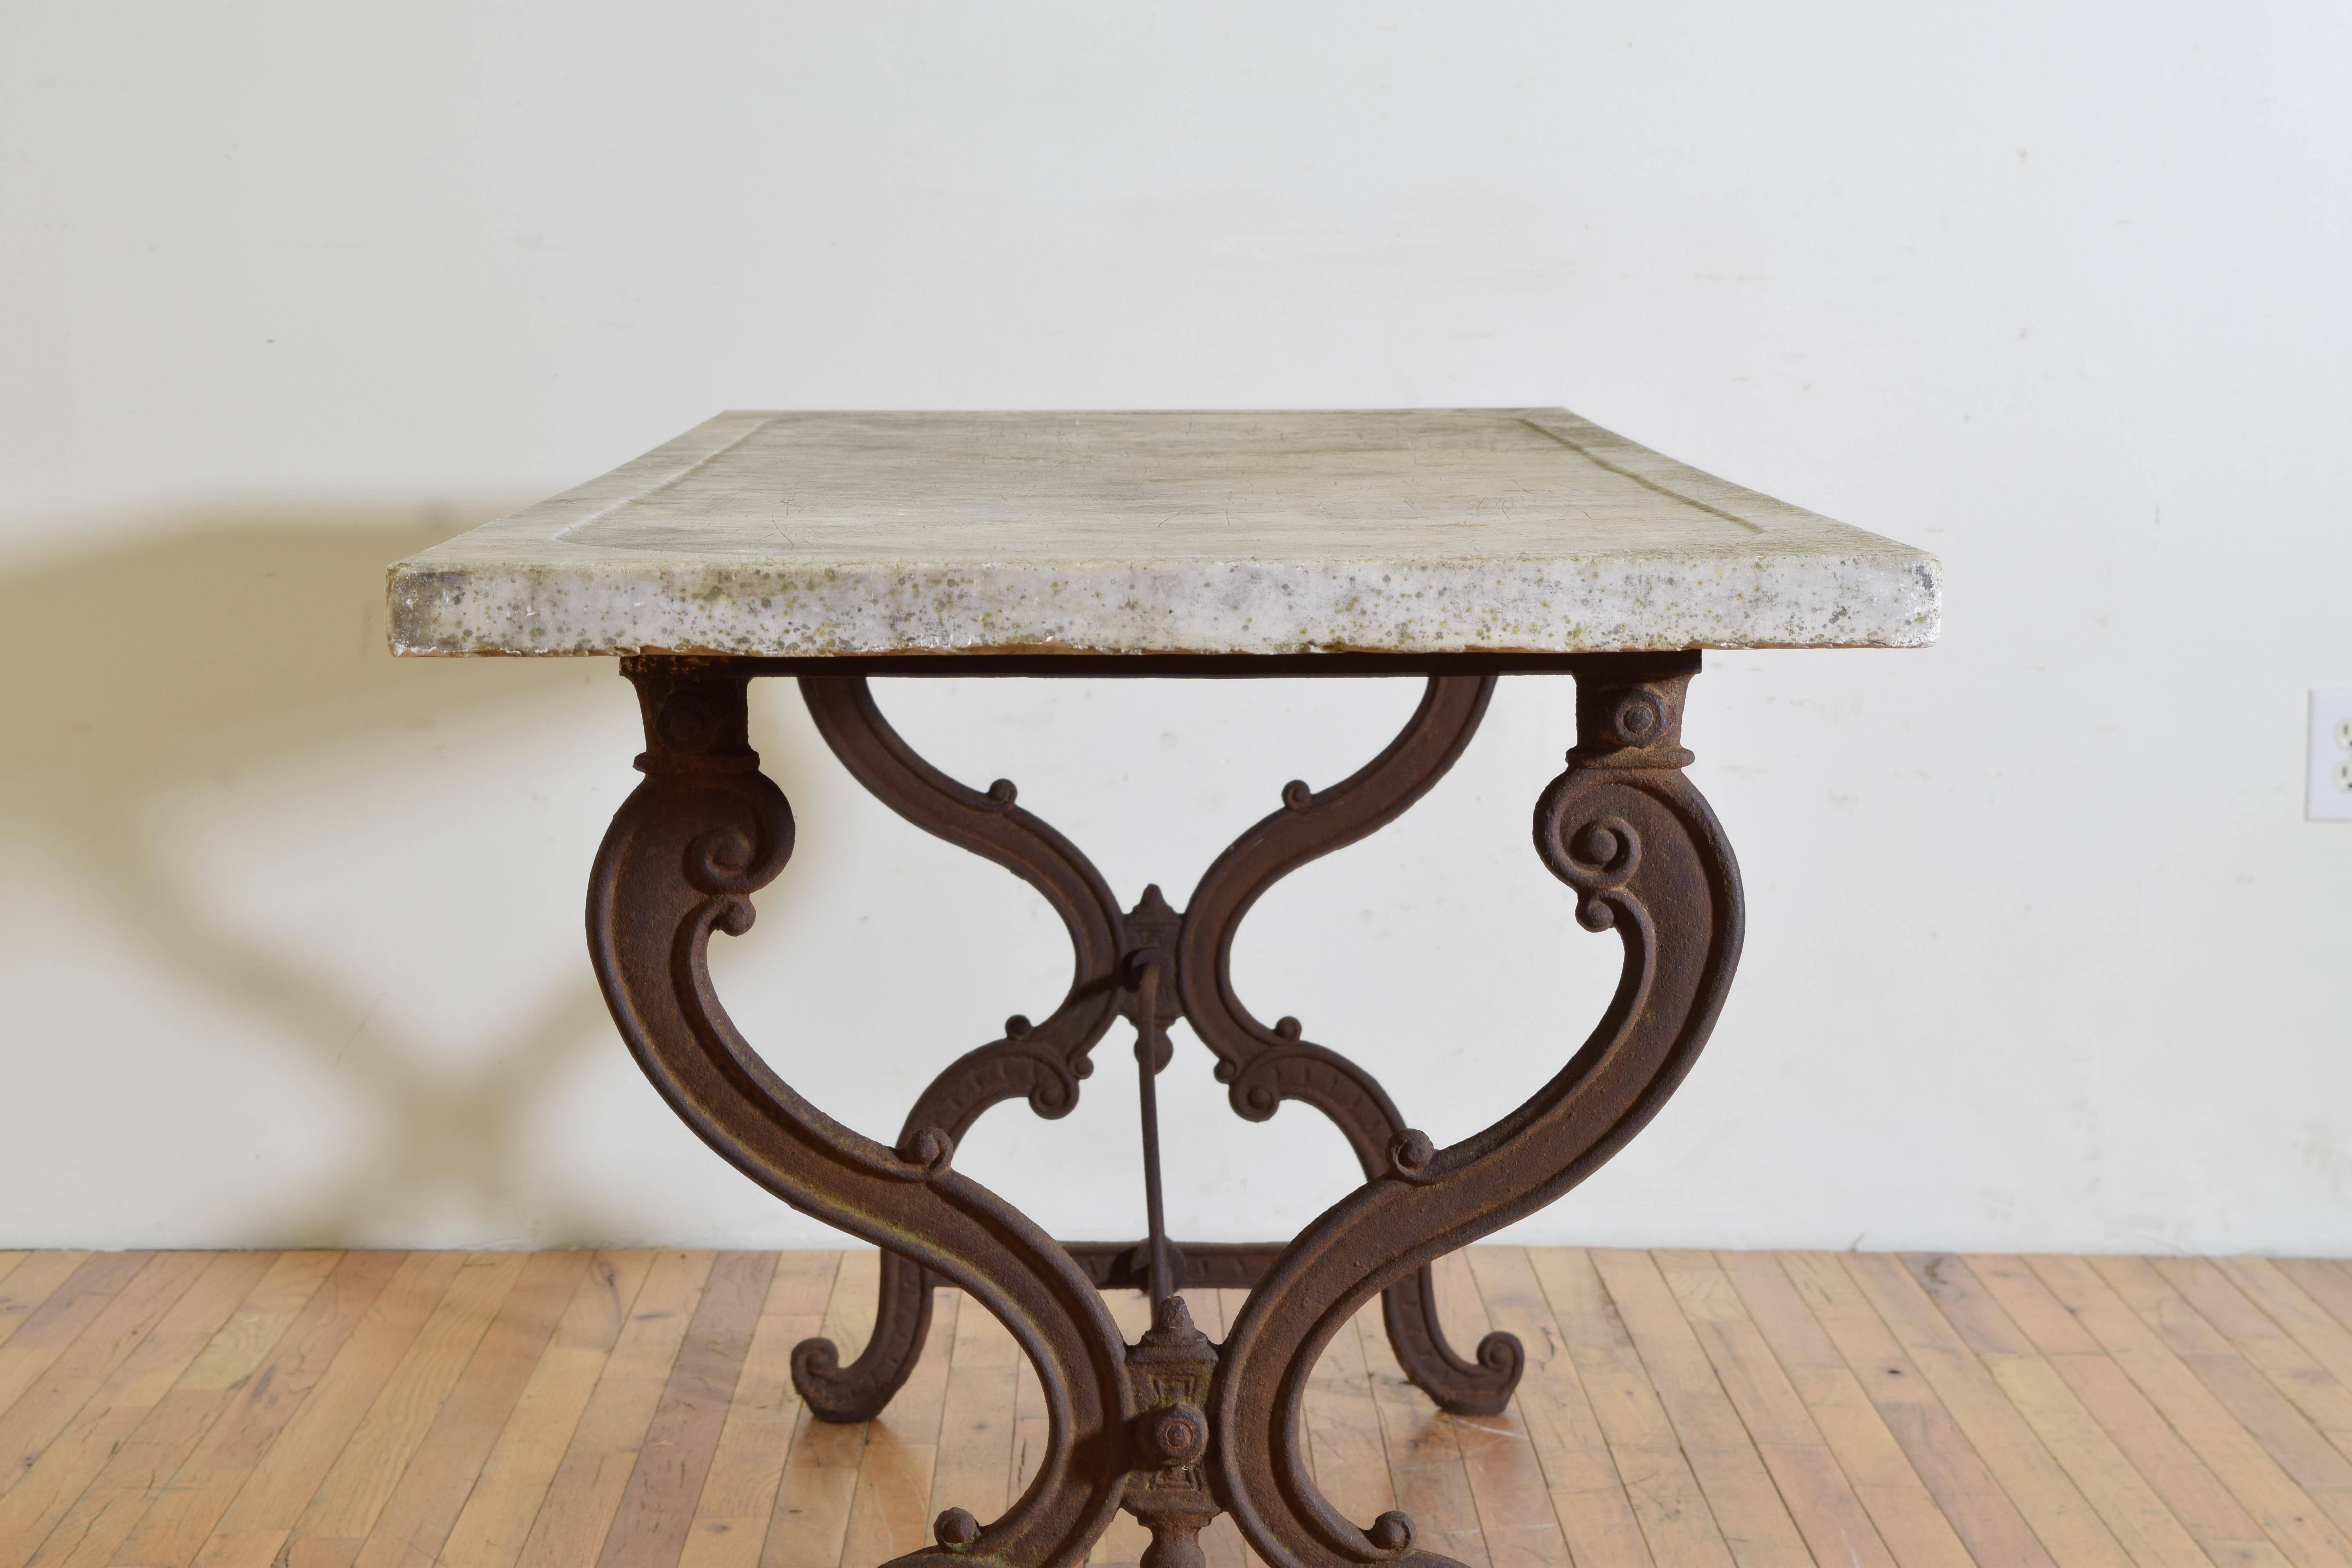 French Late Victorian Wrought Iron & Marble Gardener’s Table, lastq 19th cen. For Sale 1